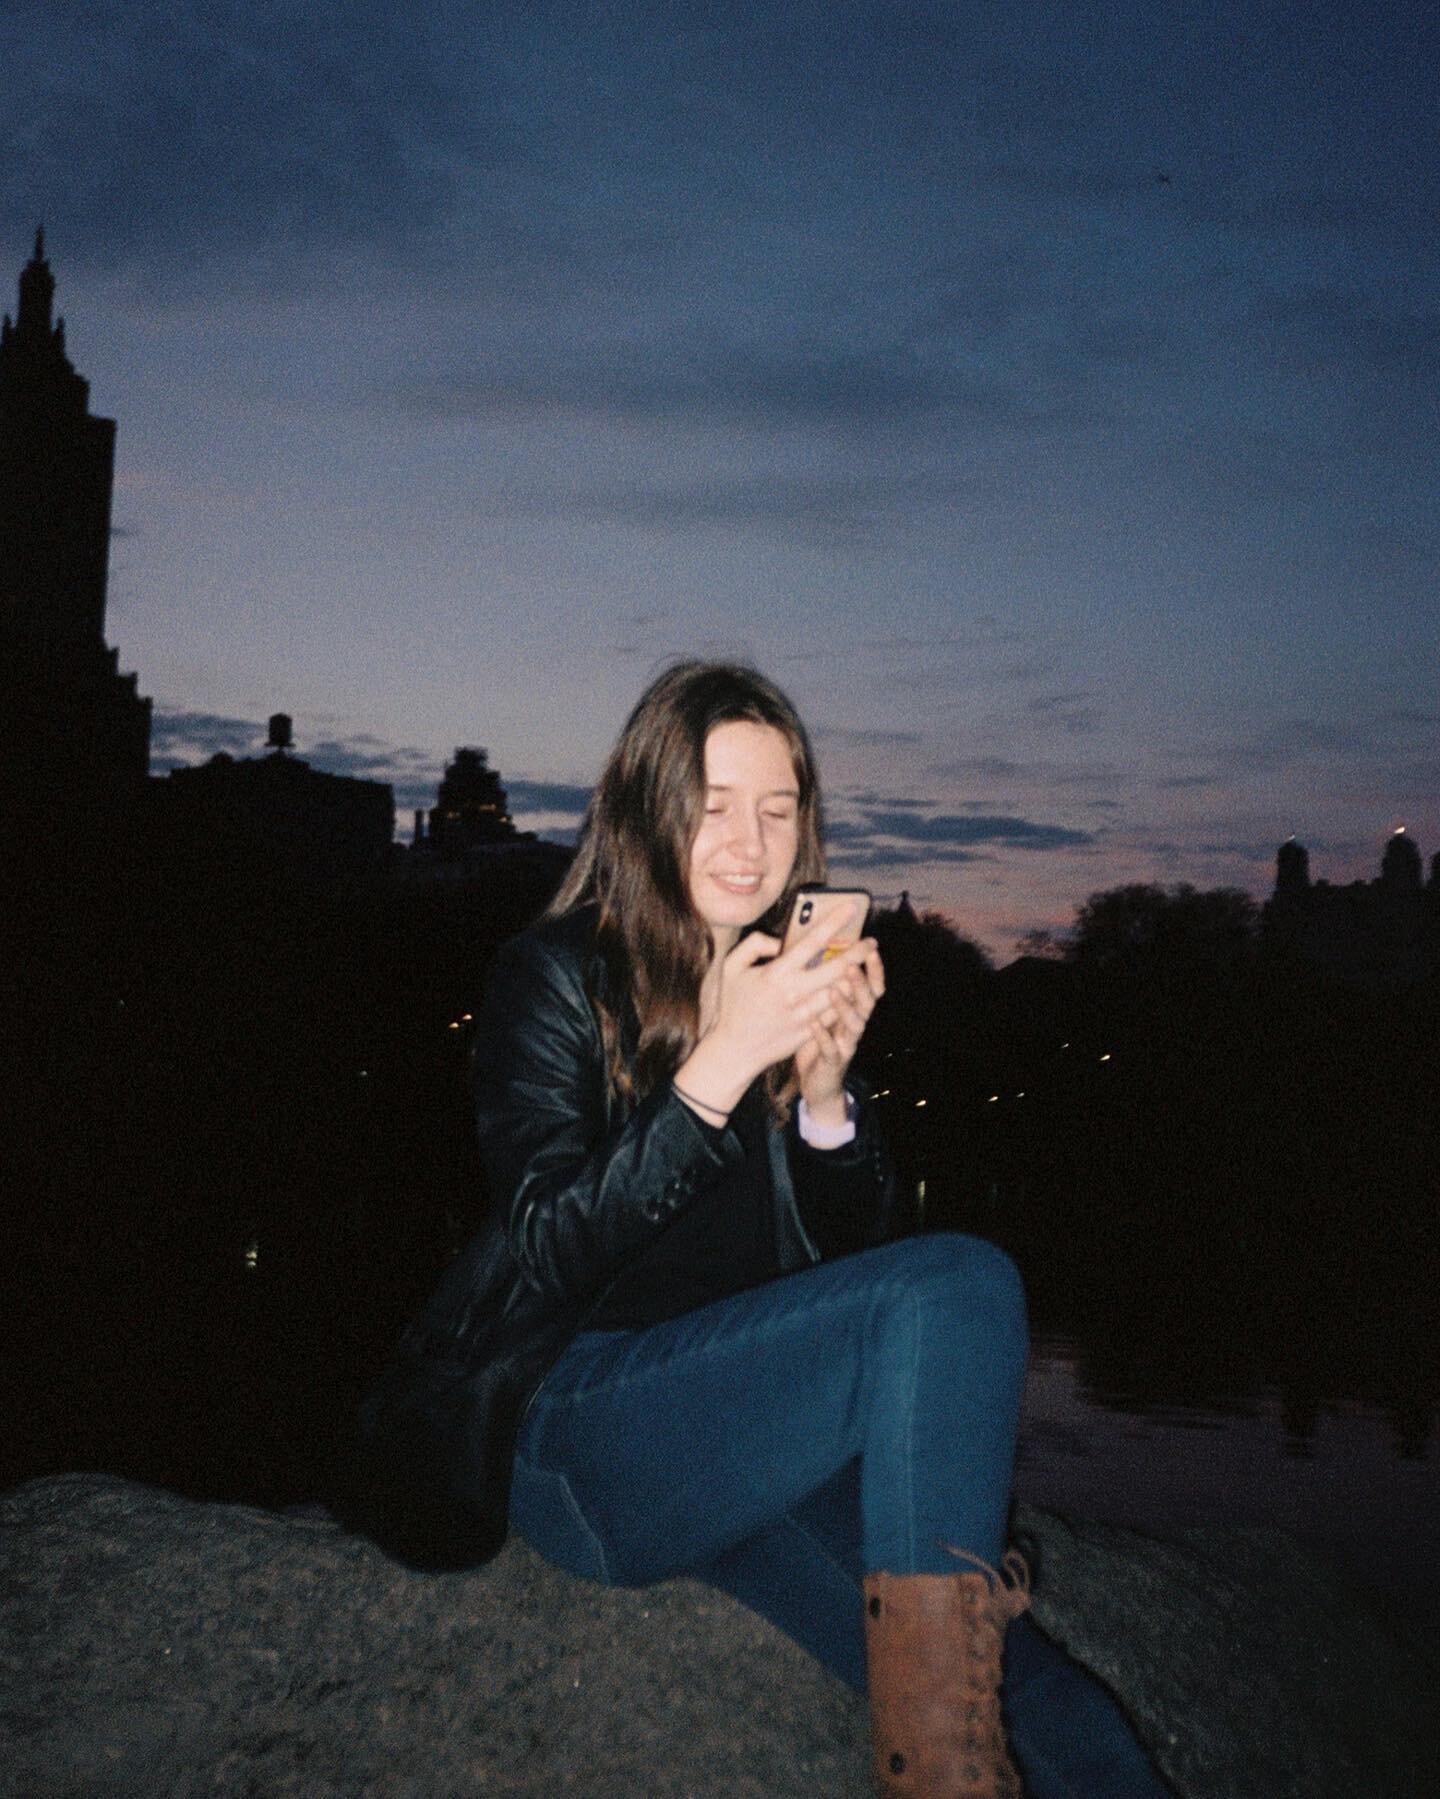 @emilysachs on easter in central park